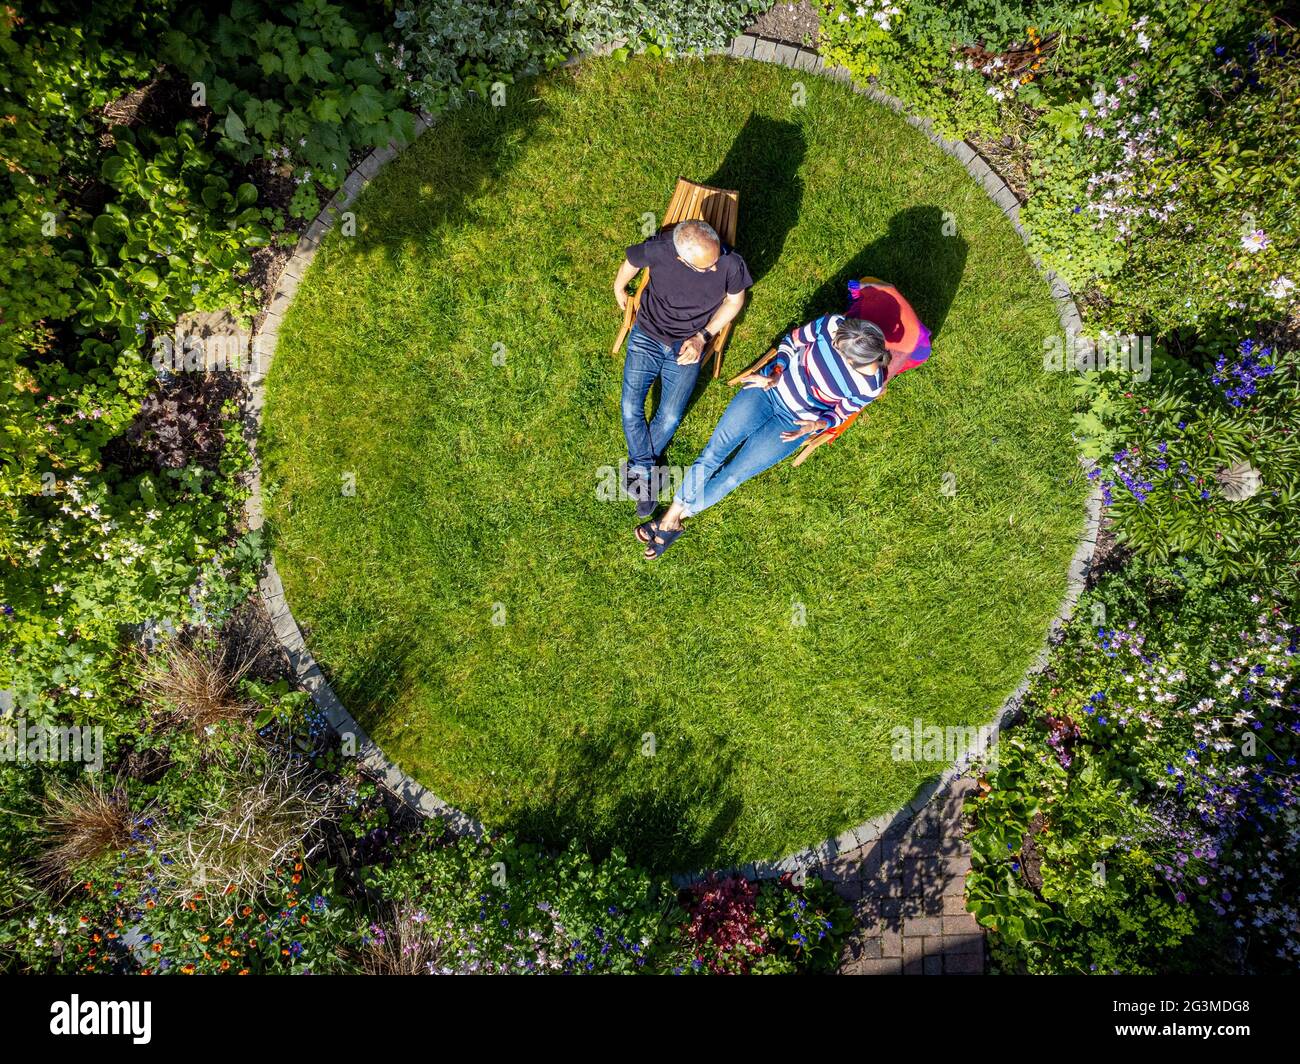 Aerial view of domestic garden with circular lawn and mature, casually dressed caucasian male and female sat on wooden deckchairs. Stock Photo